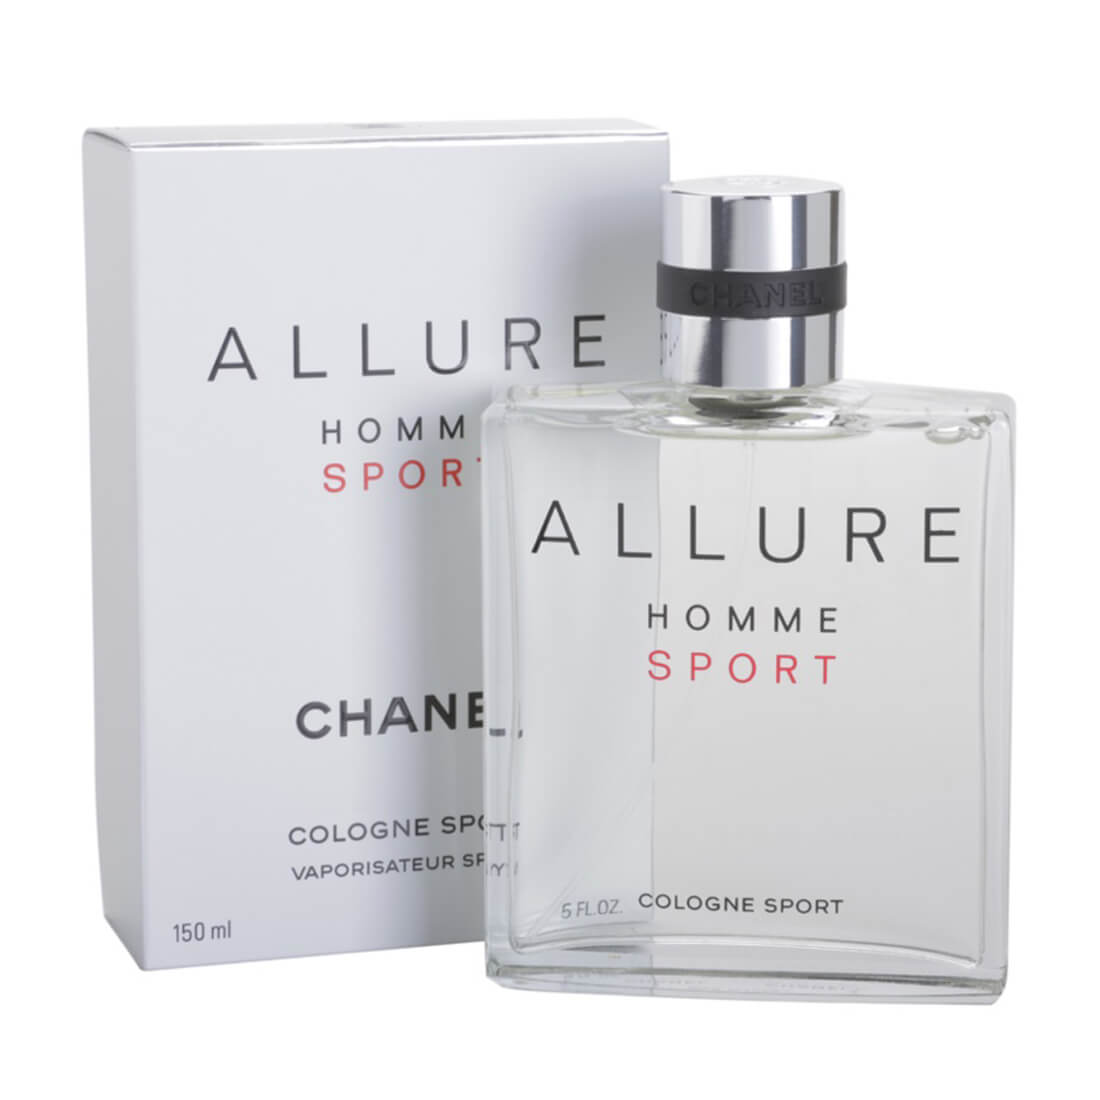 CHANEL ALLURE HOMME SPORT Cologne 3.4oz / 100ml EDT Spray NEW IN